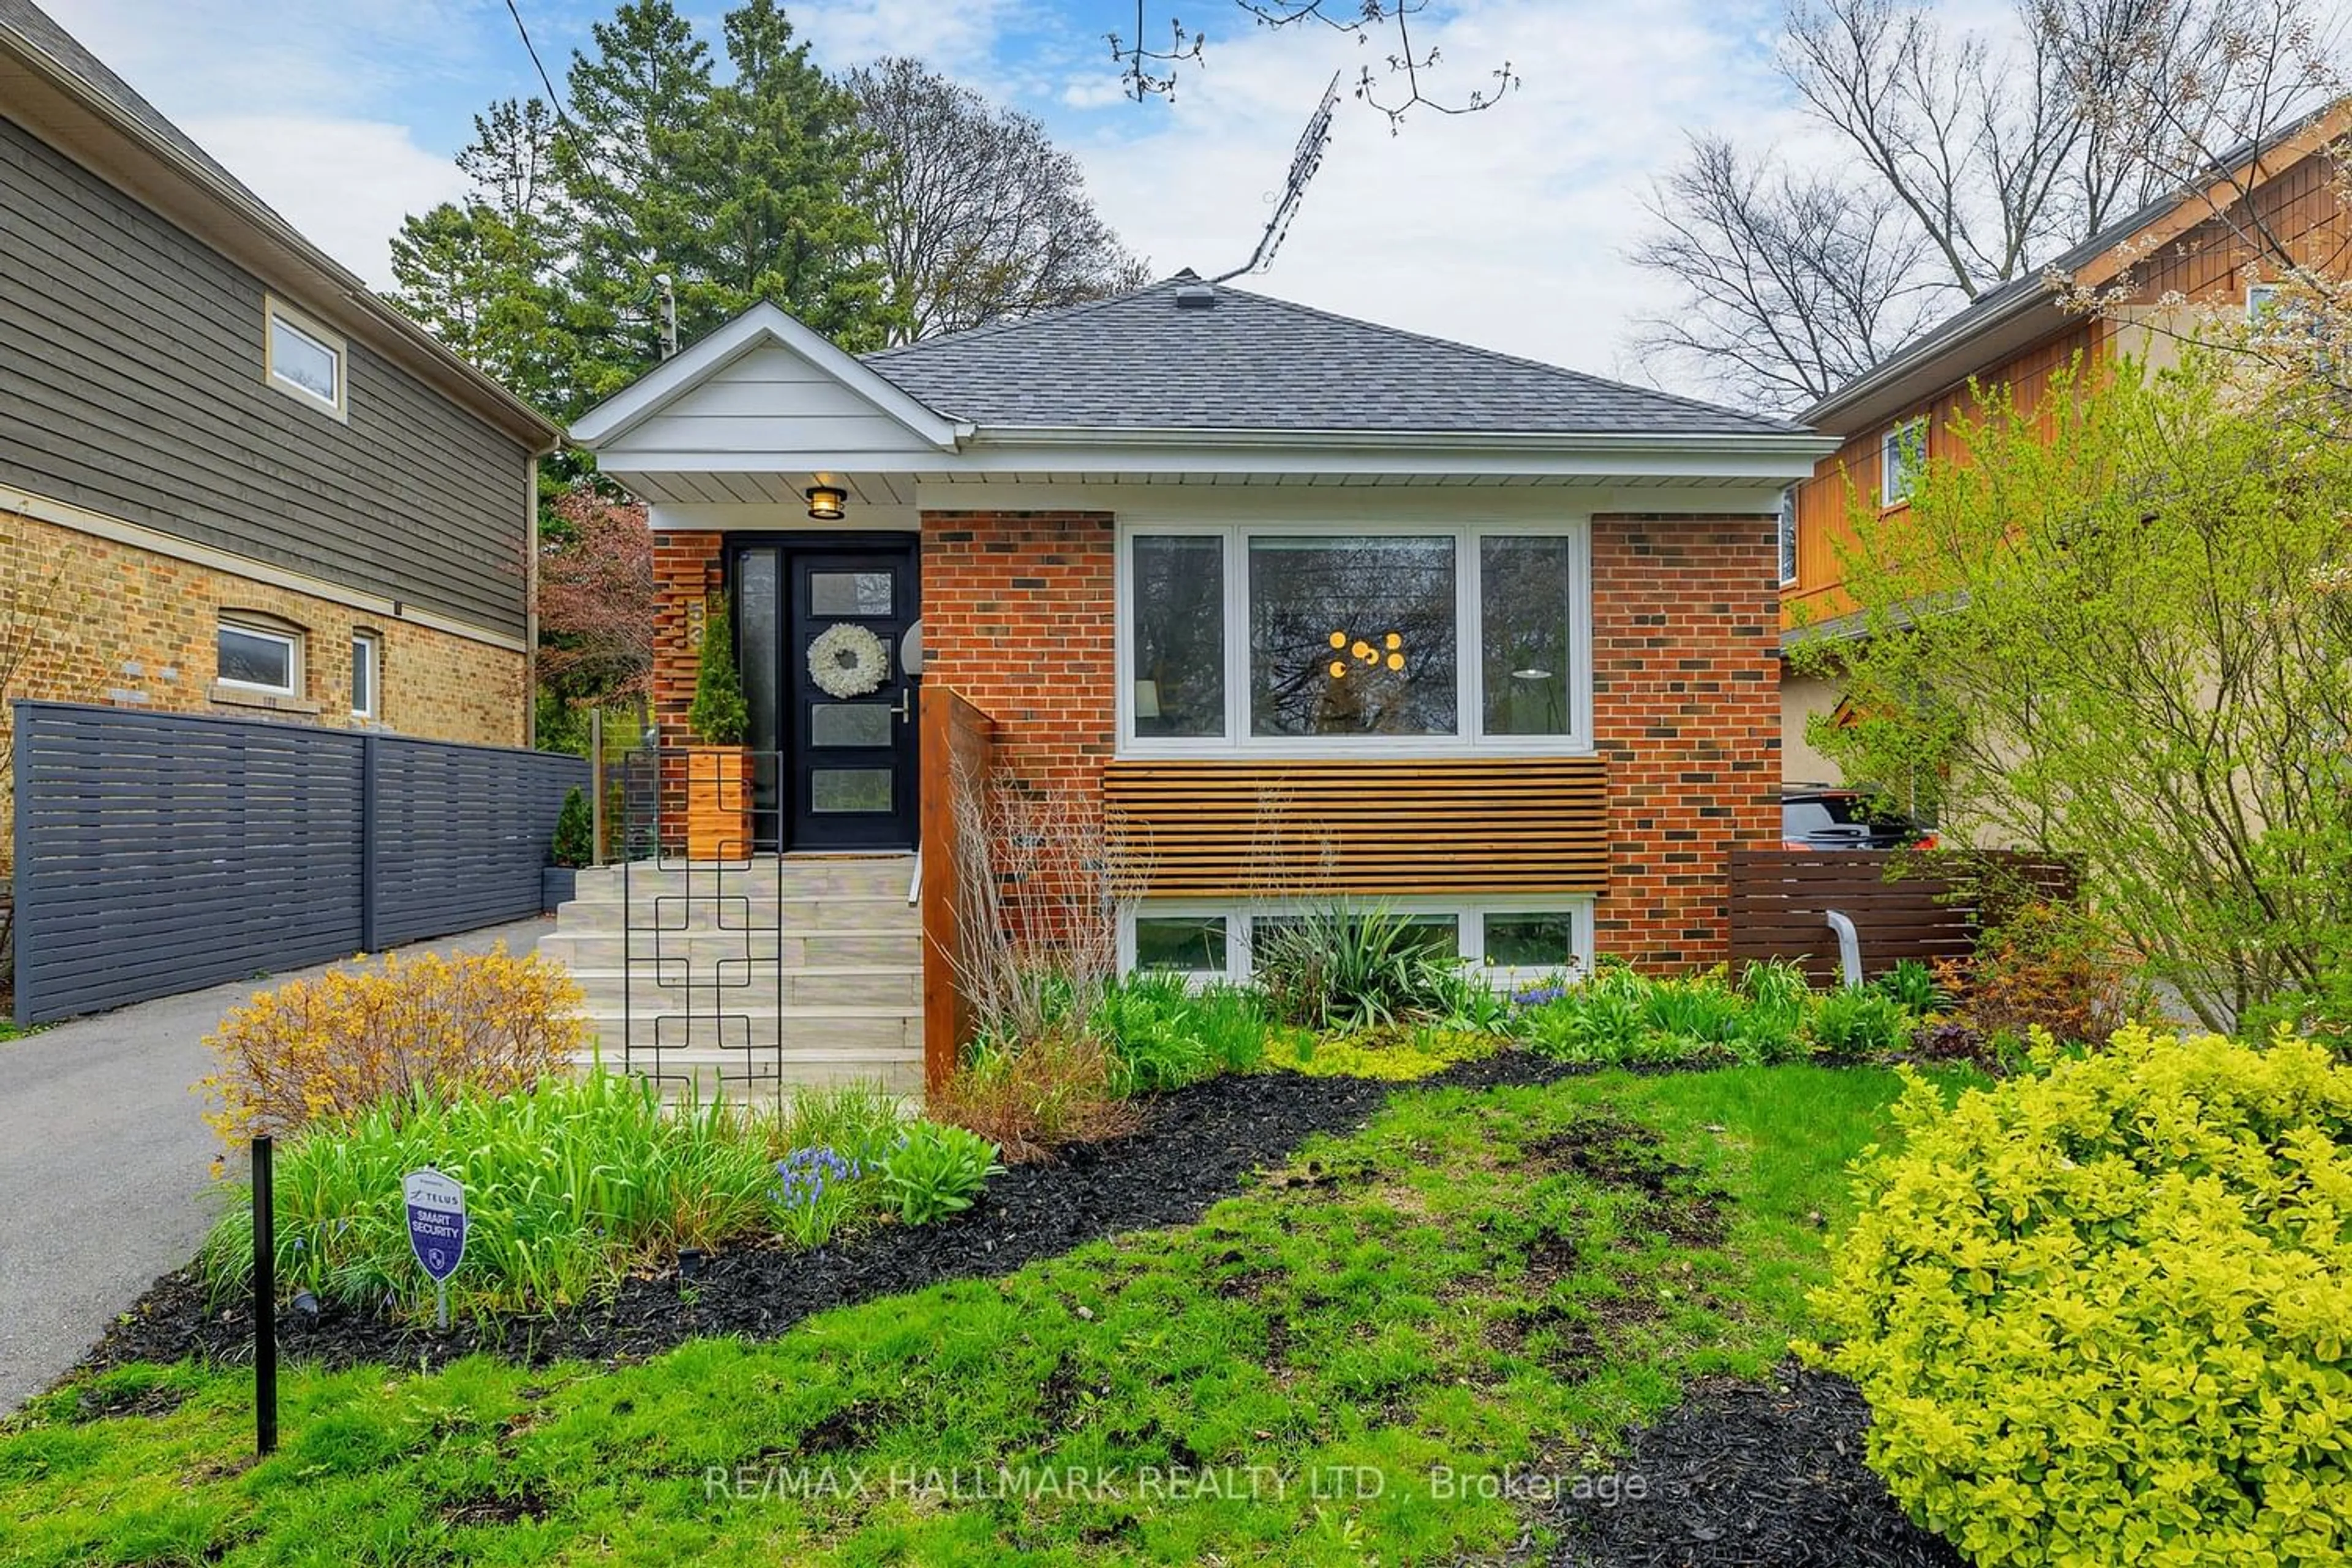 Home with brick exterior material for 53 Presley Ave, Toronto Ontario M1L 3P4